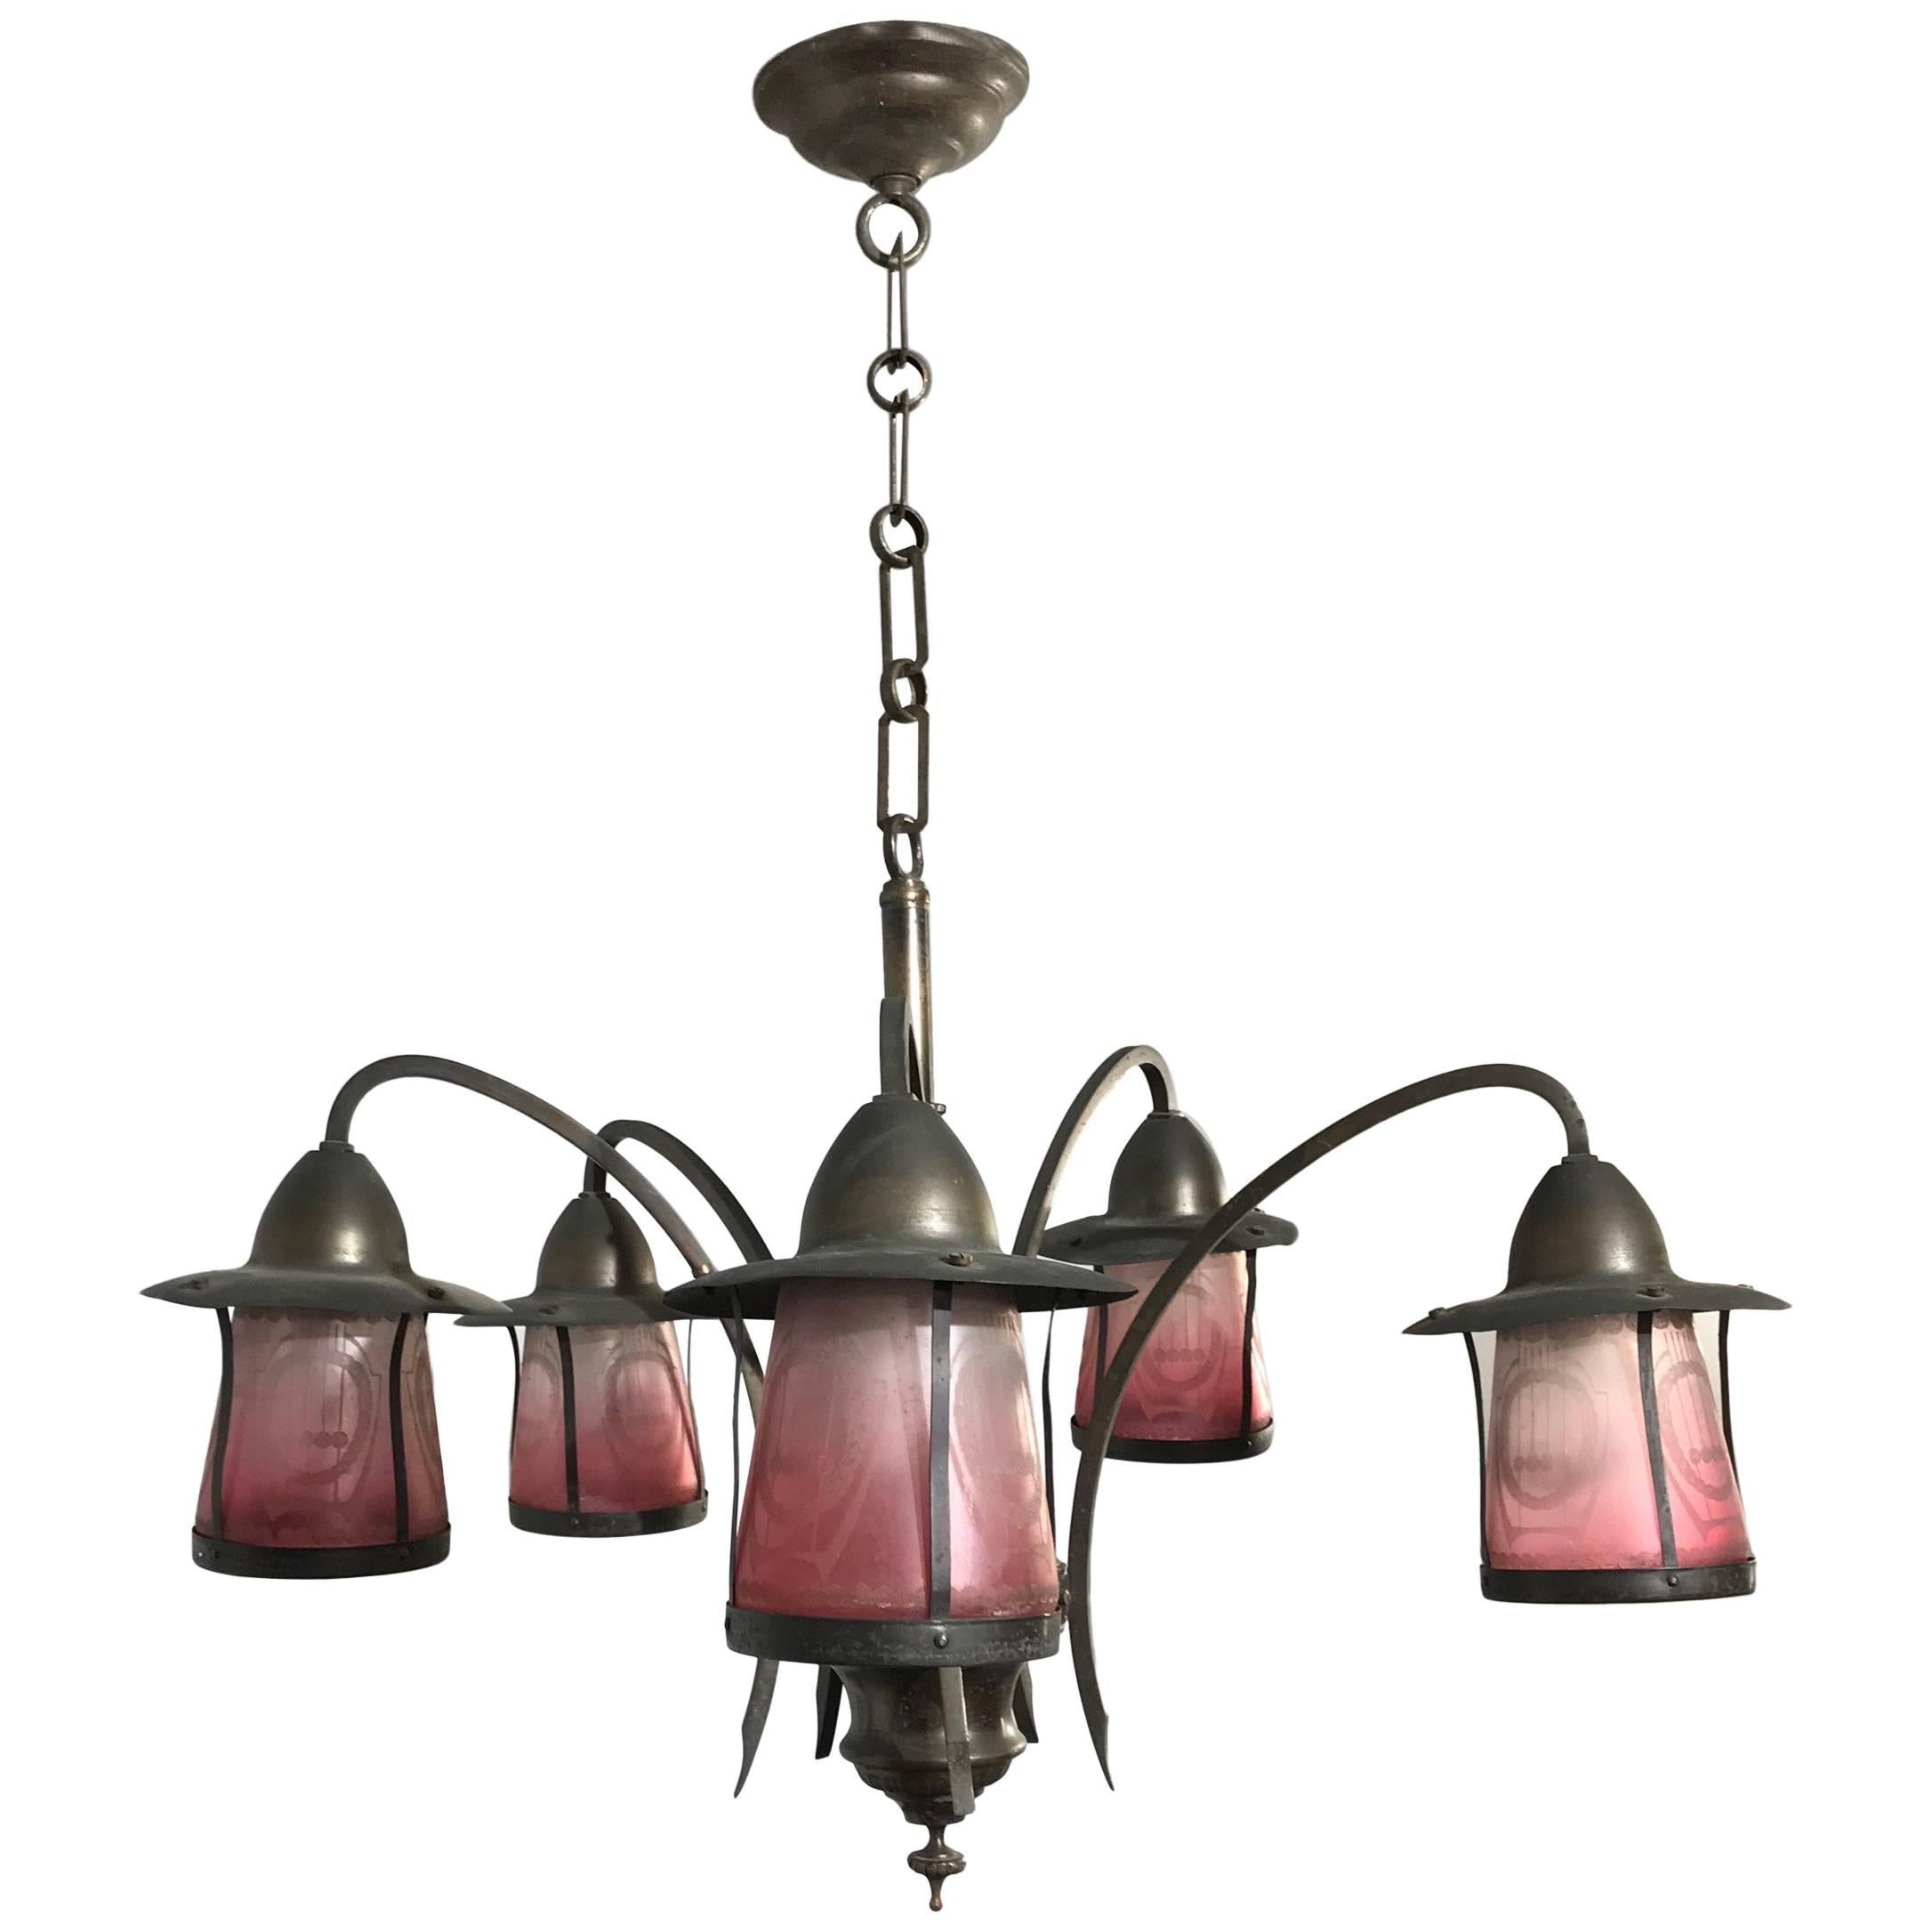 Unique Arts an Crafts Brass Pendant Light with Acid Etched Color Glass Shades